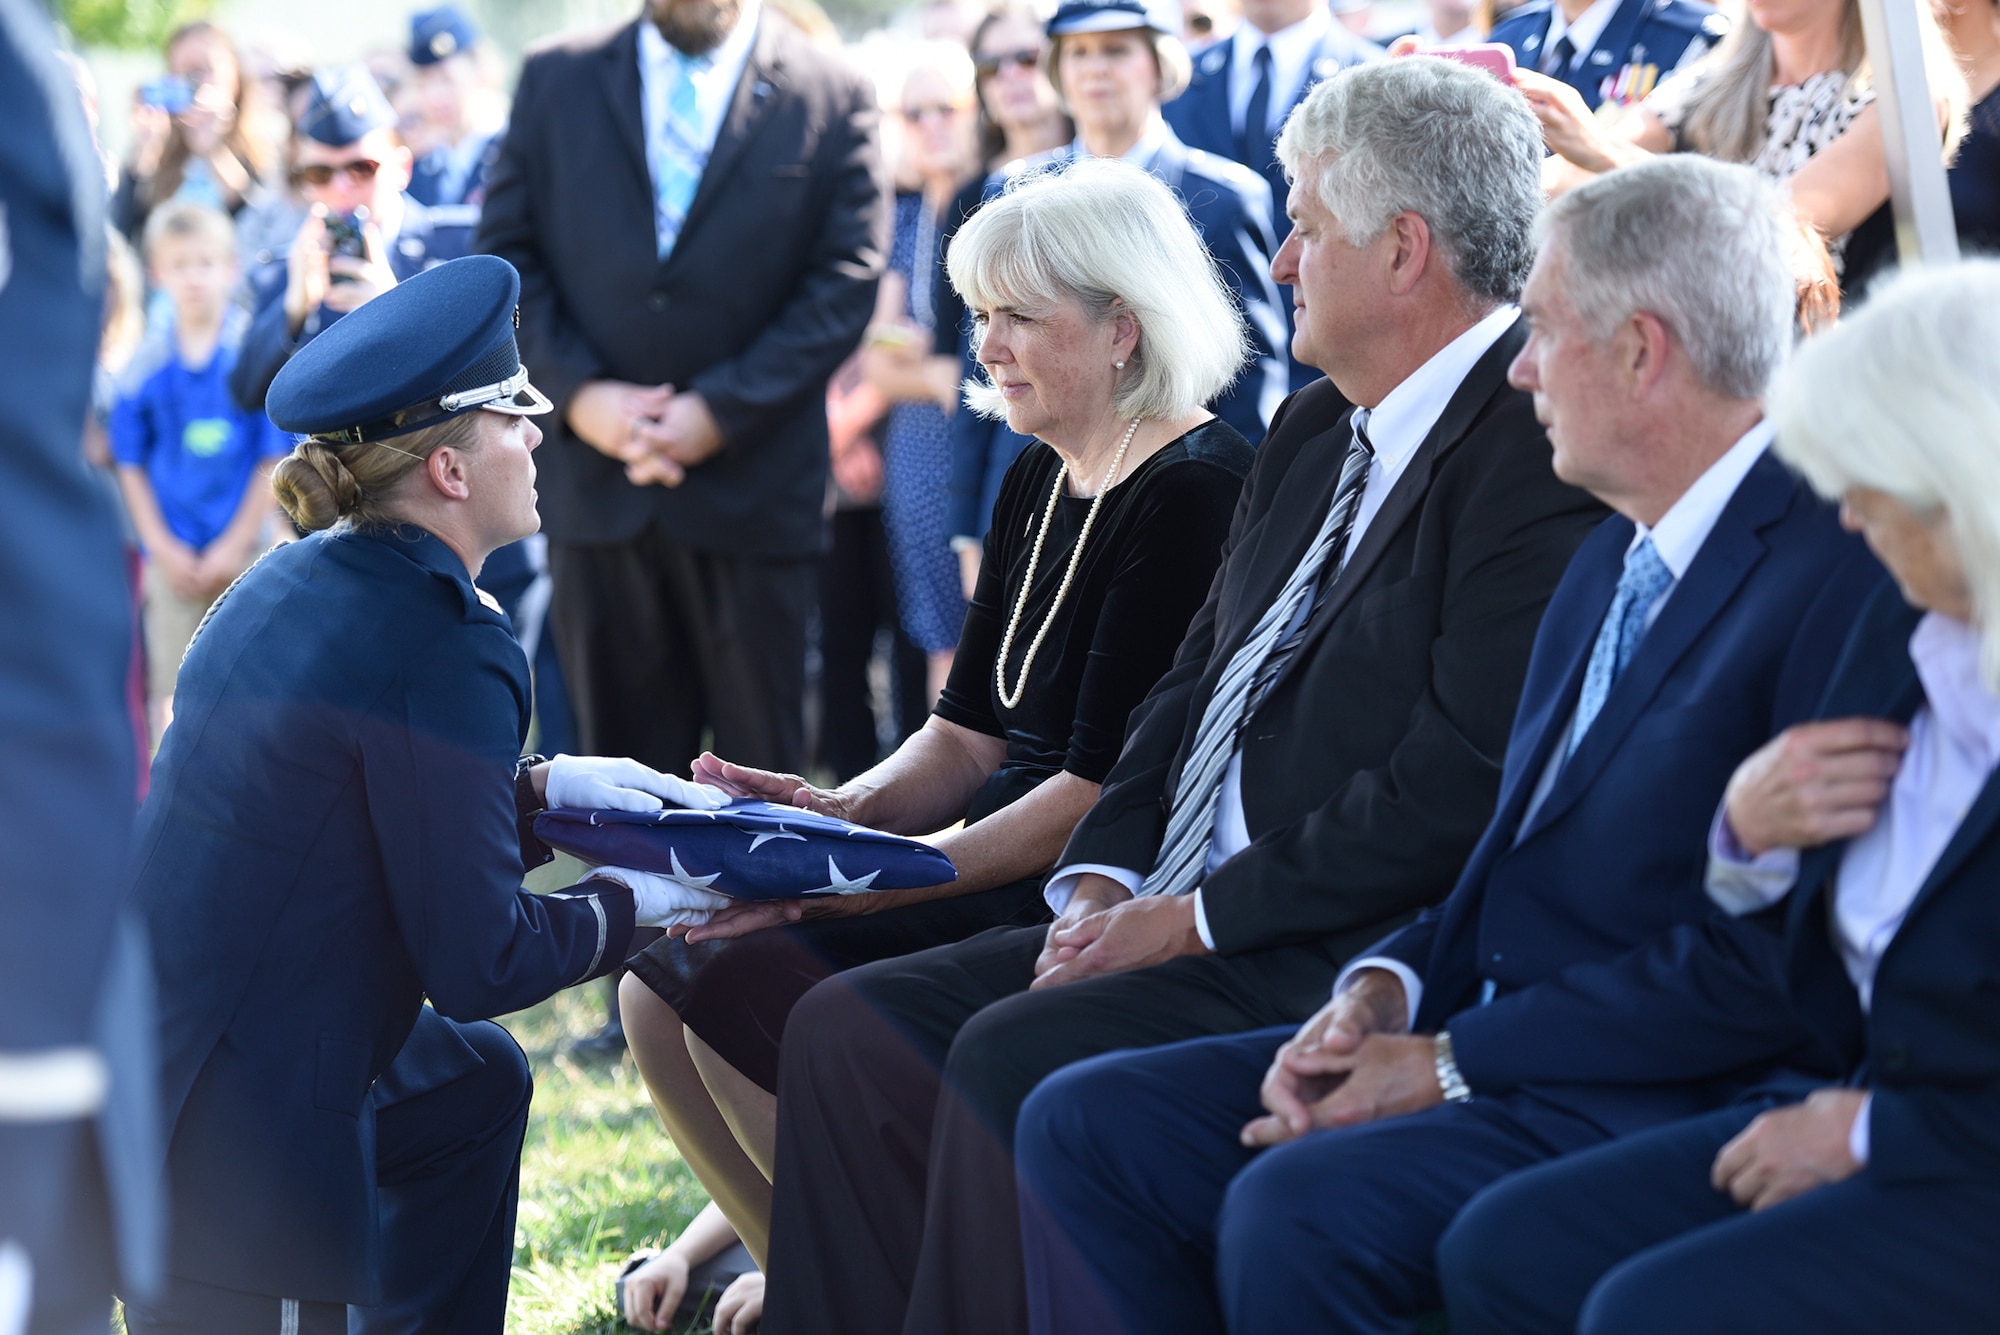 Terry Harmon, the daughter of Women Airforce Service Pilot 2nd Lt. Elaine Harmon, receives the American flag from a member of the U.S. Air Force Honor Guard during her late-mother’s interment ceremony at Alrington National Cemetery, Va., Sept. 7, 2016. Harmon died in 2015 at the age of 95. (U.S. Air Force photo/Staff Sgt. Alyssa C. Gibson)